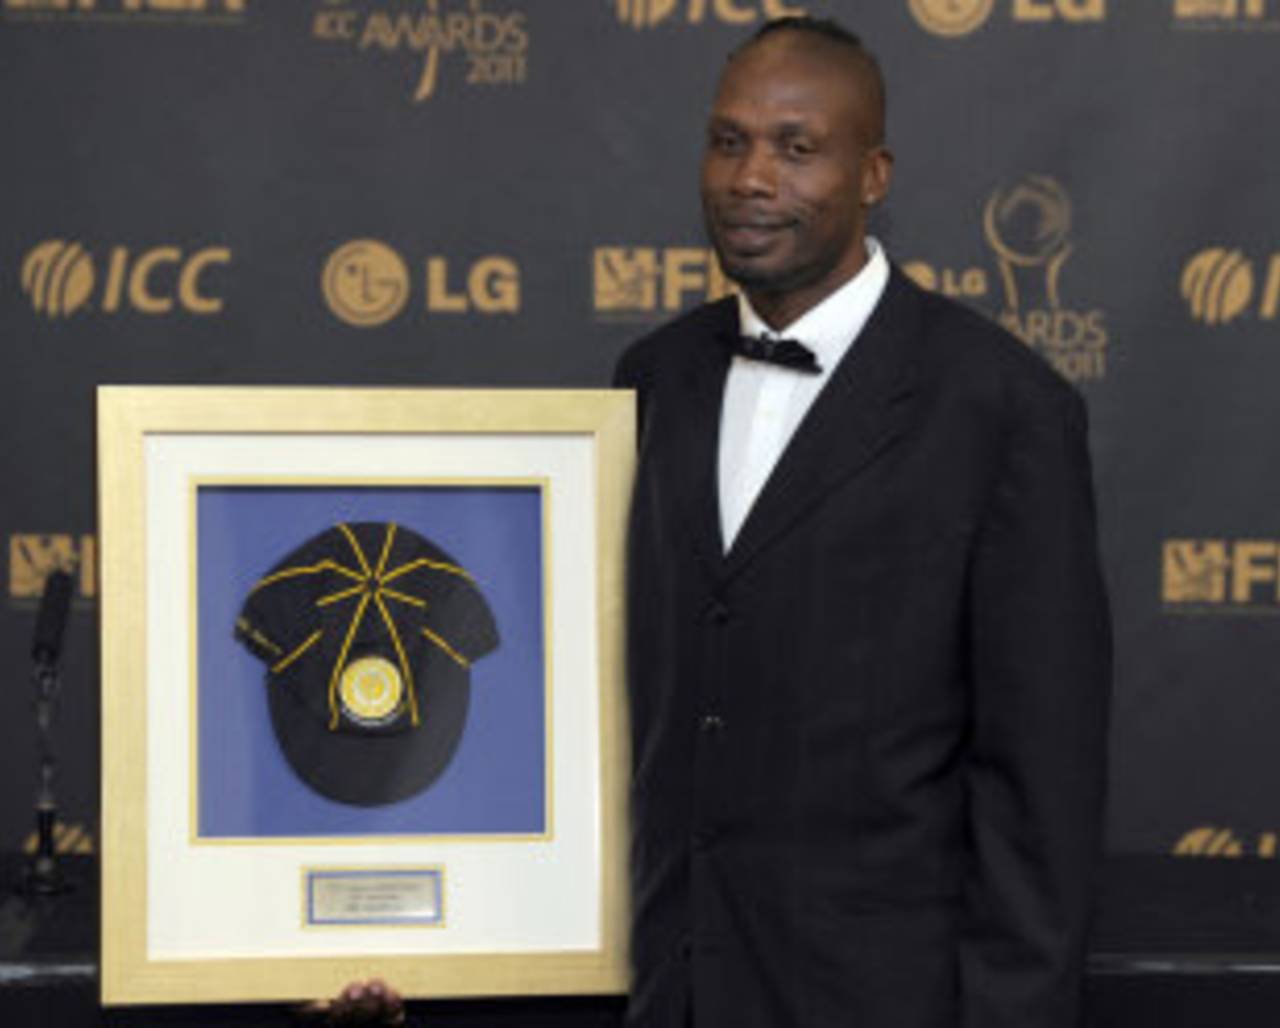 Curtly Ambrose sports his memento after being inducted into the ICC Hall of Fame, ICC Awards, London, September 12, 2011